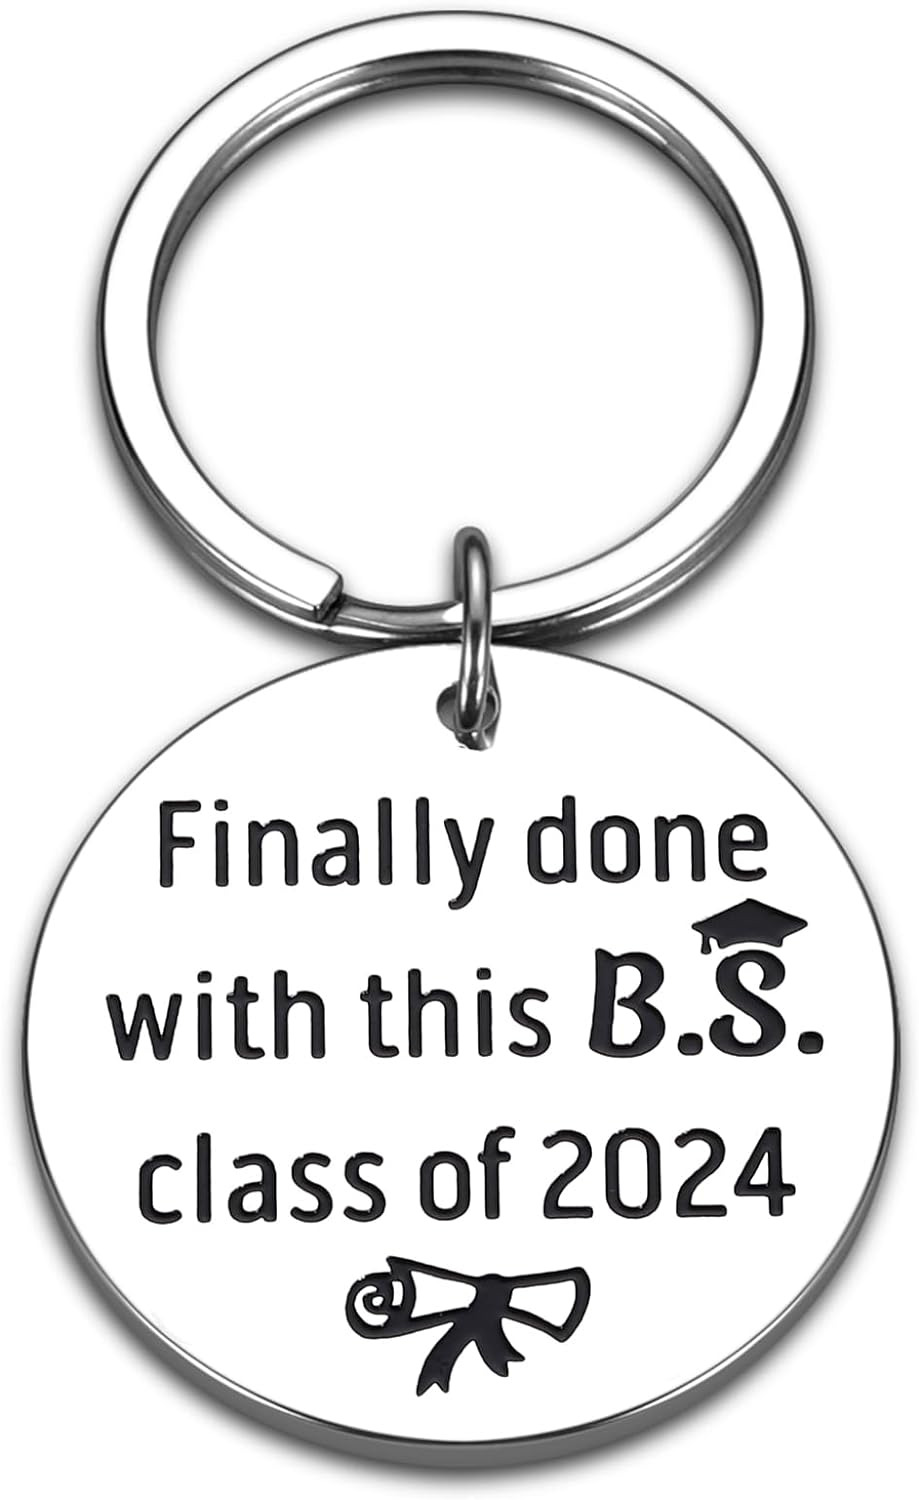 Class of 2024 Graduation Keychain, Funny Graduation Gifts for Her Him, 2024 Coll